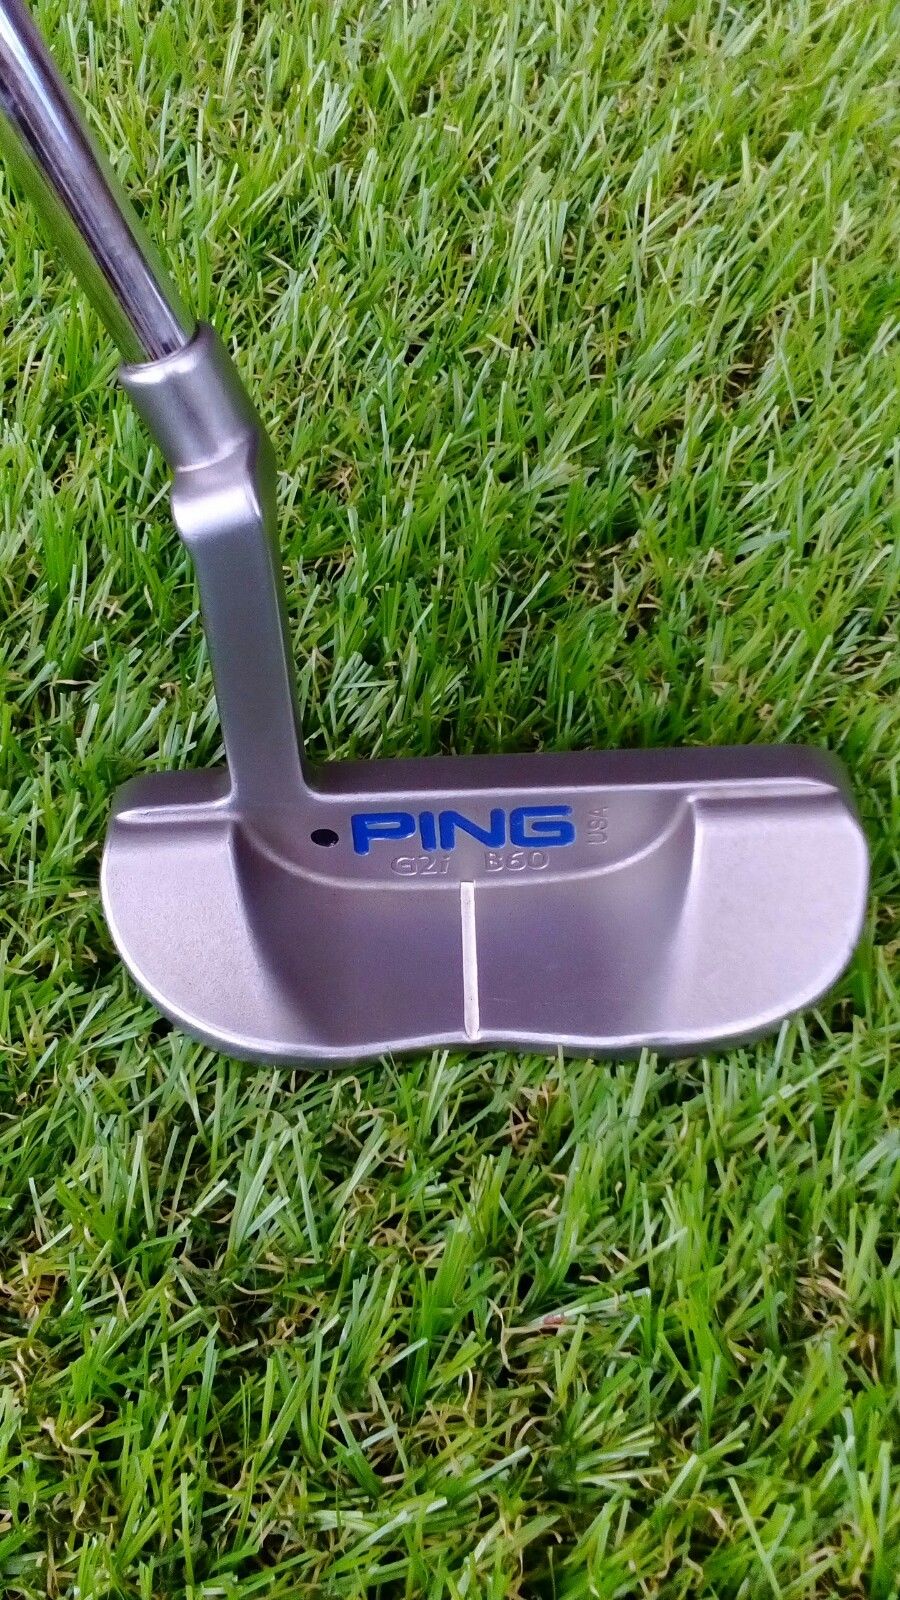 Man tries to sell his golf club over Facebook, gets crazy response!